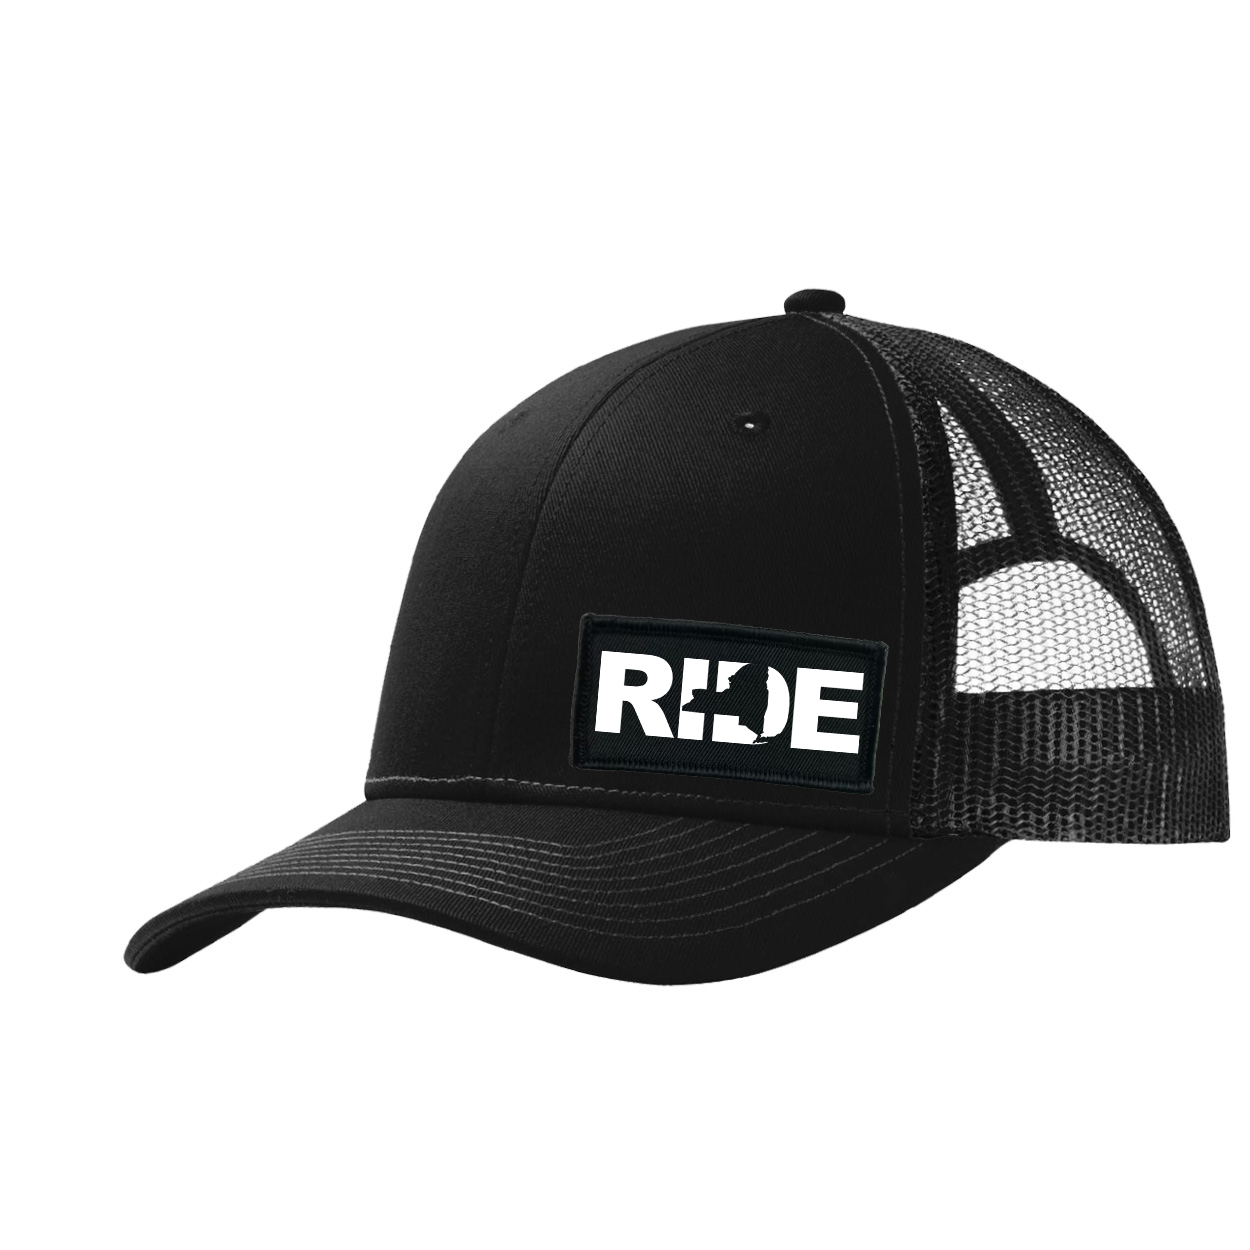 Ride New York Night Out Woven Patch Snapback Trucker Hat Black (White Logo)